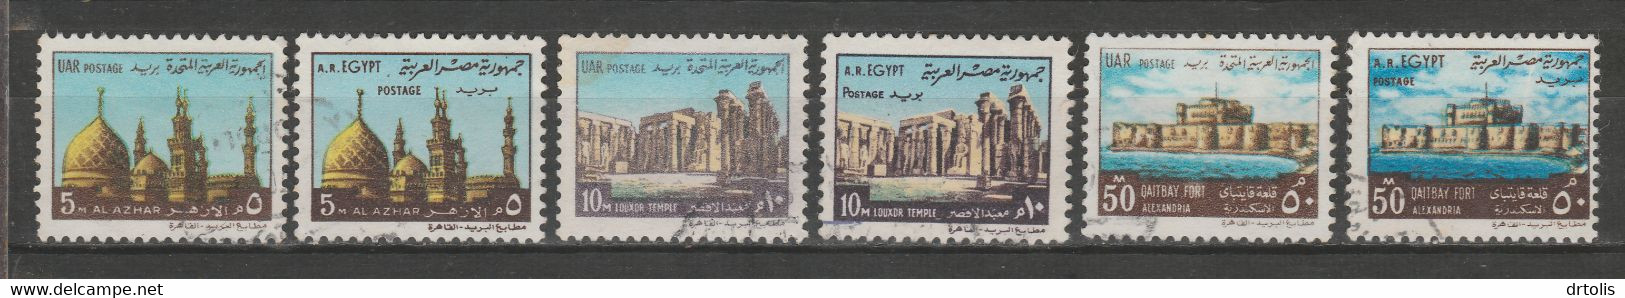 EGYPT / 1970 & 1972 ISSUES / VF USED - Usati